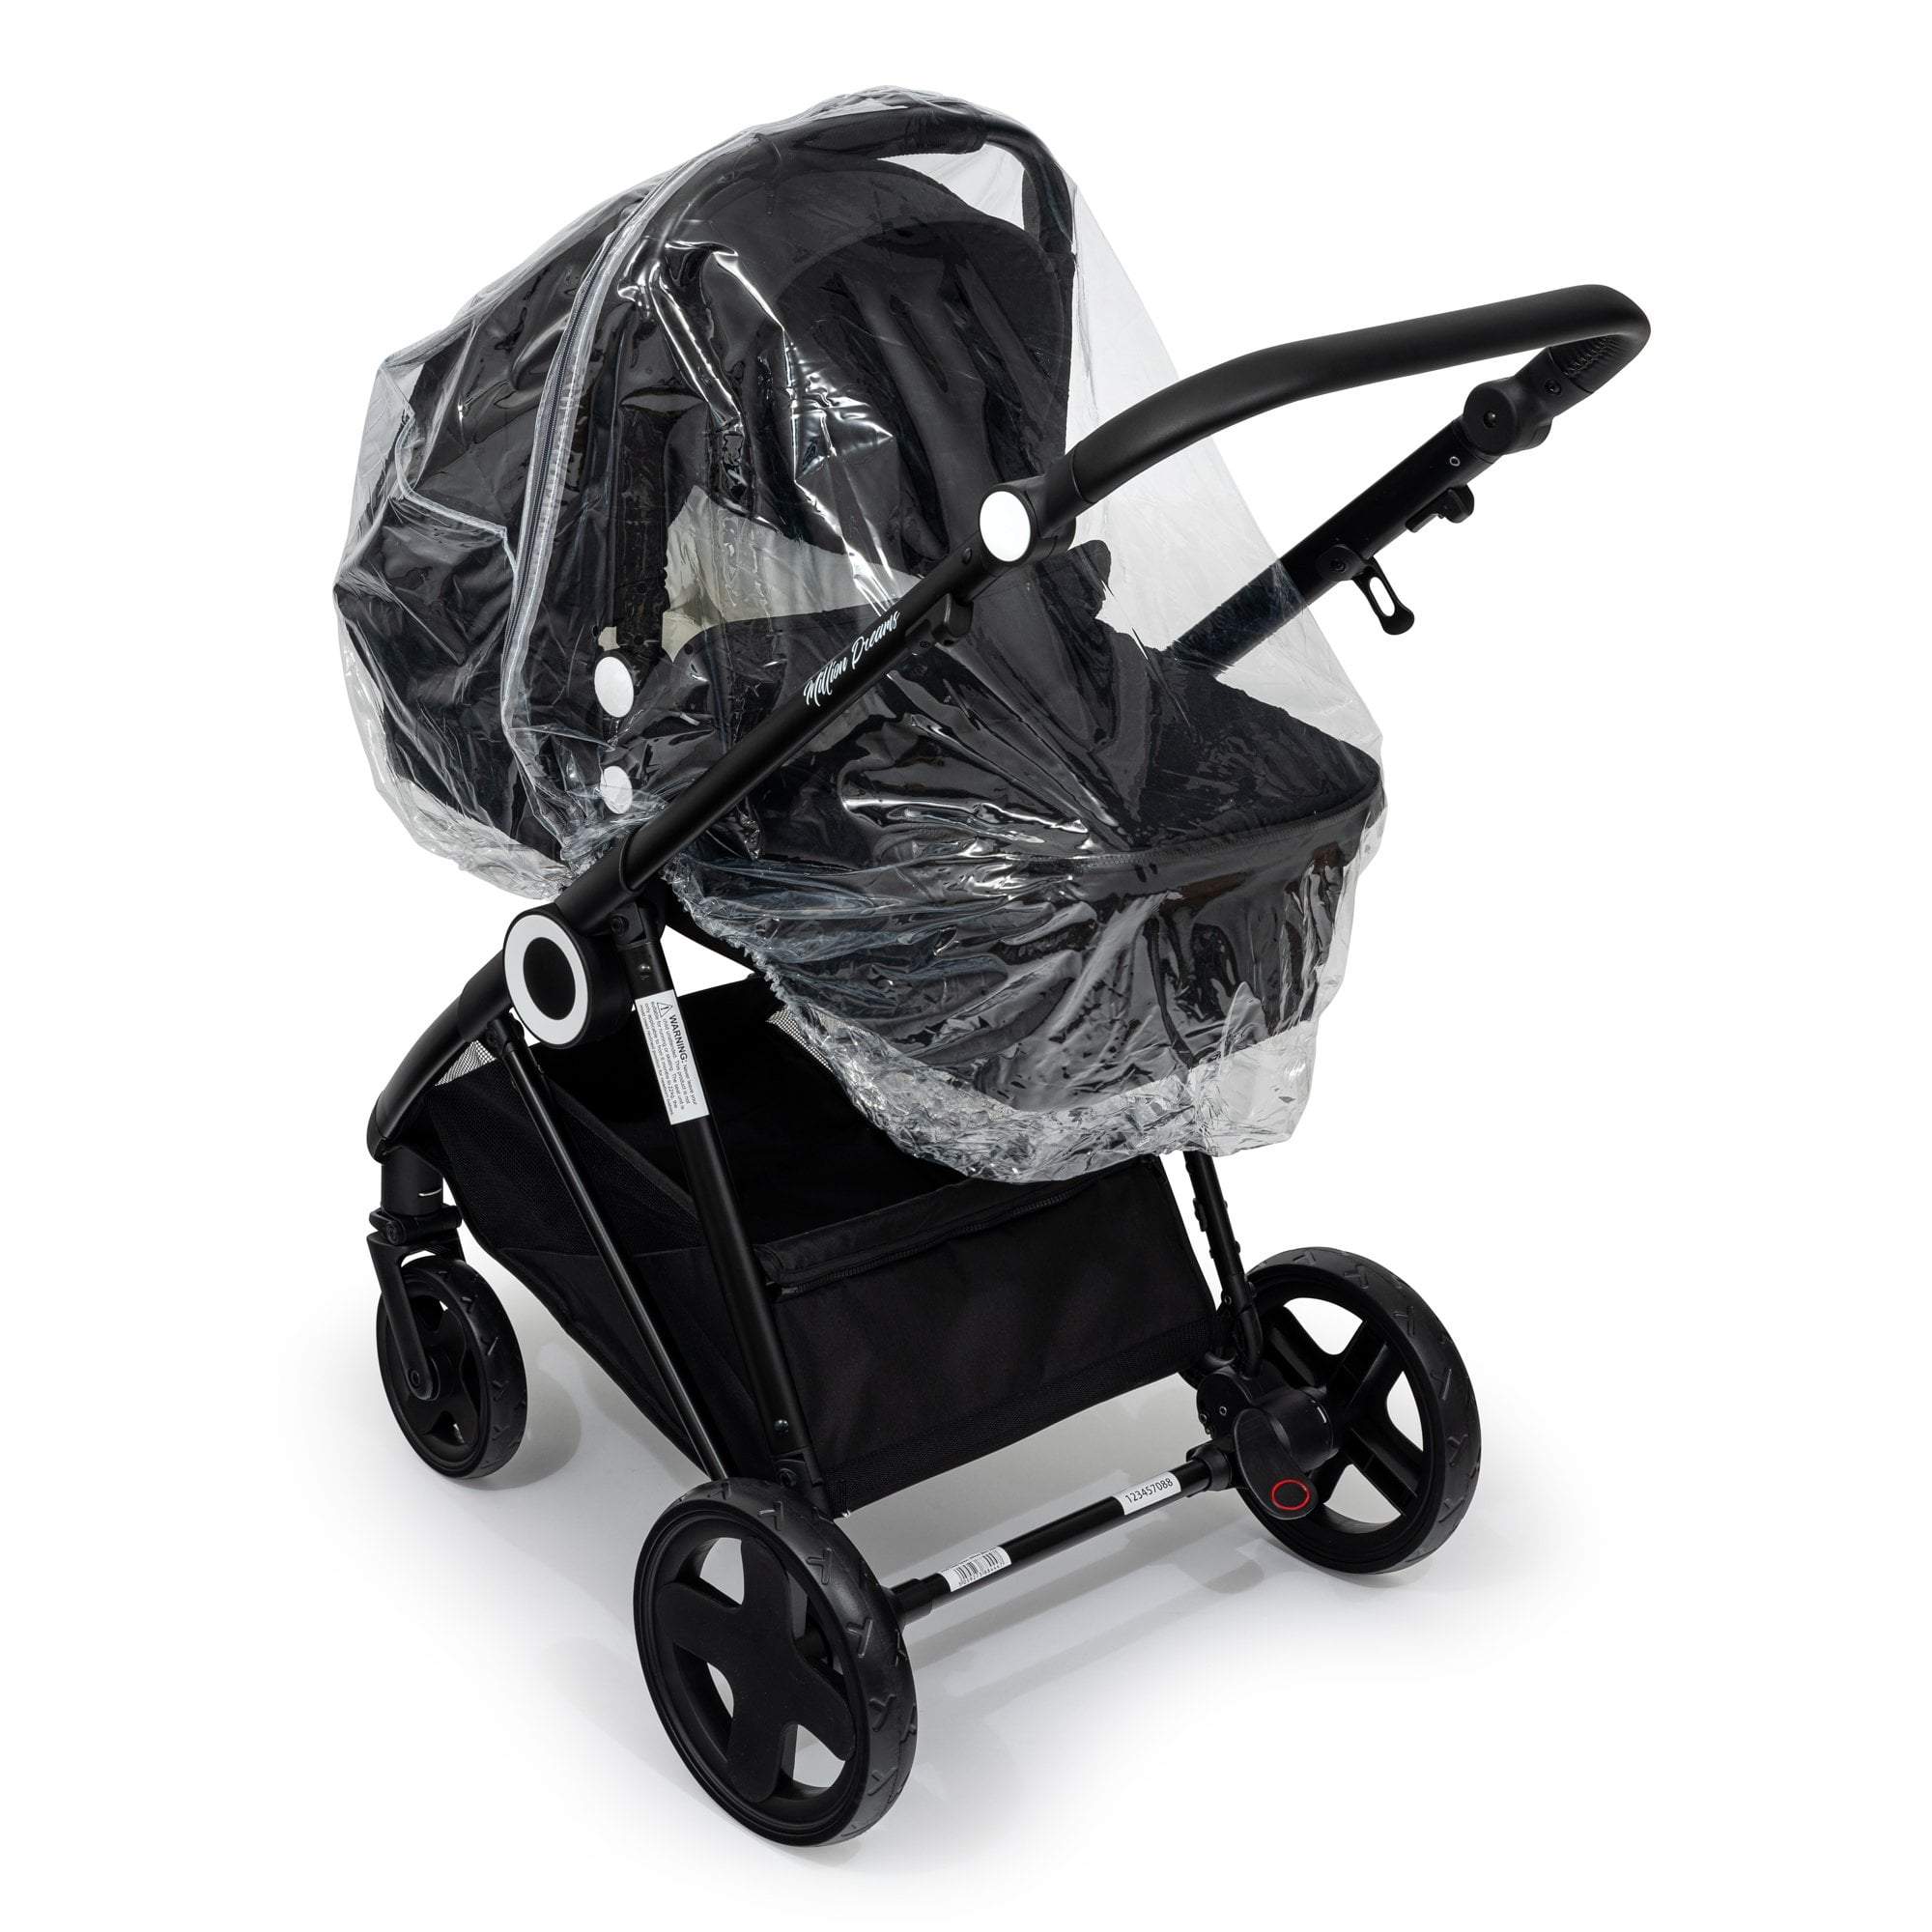 Carrycot Raincover Compatible With Babylo - Fits All Models - For Your Little One